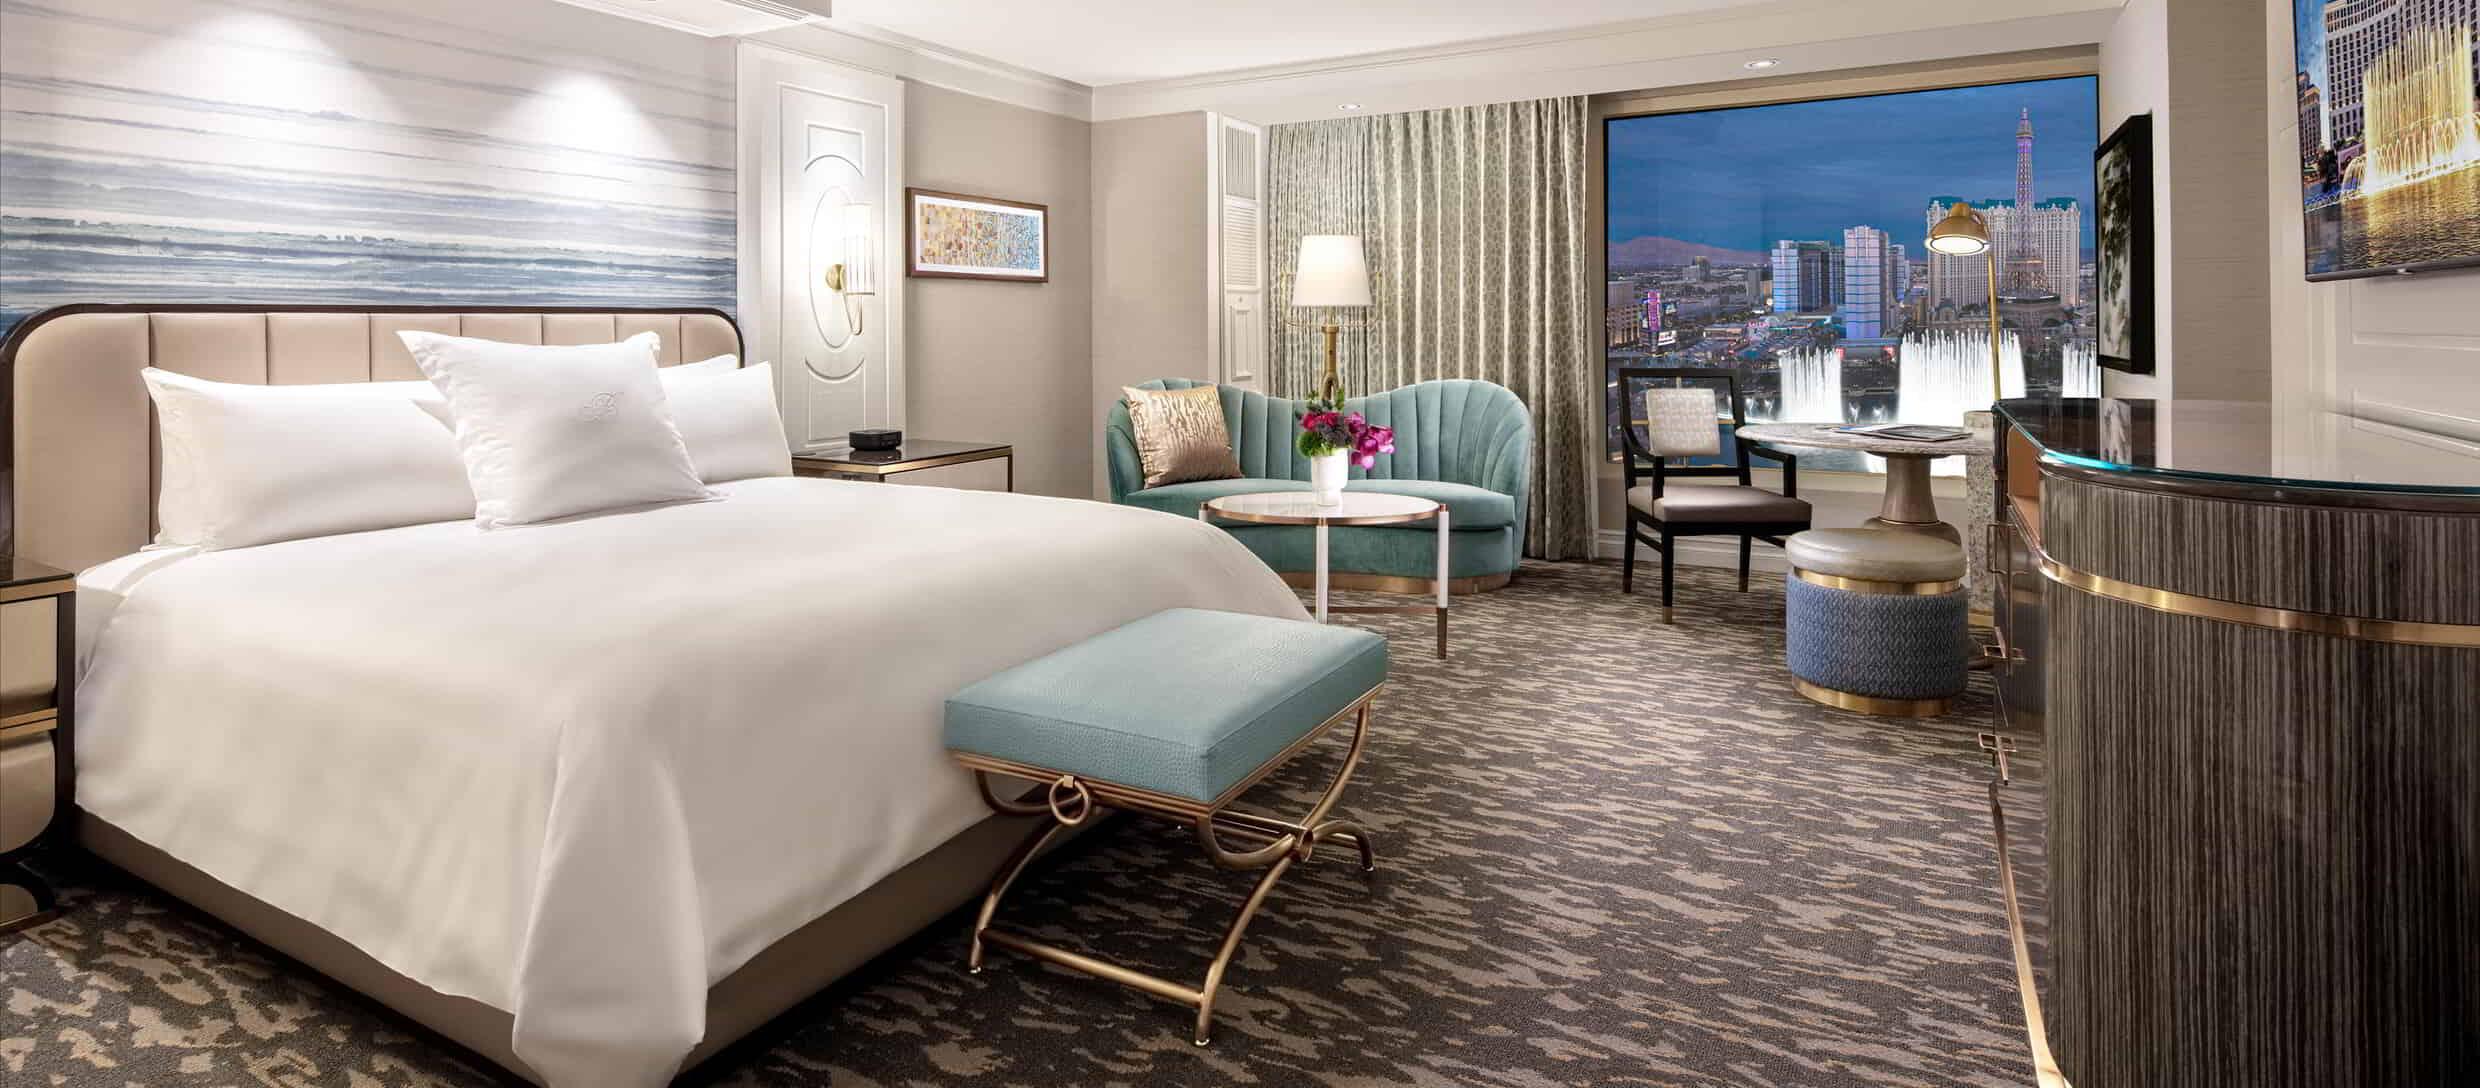 King suite overlooking Las Vegas City skyline and fountain at night.